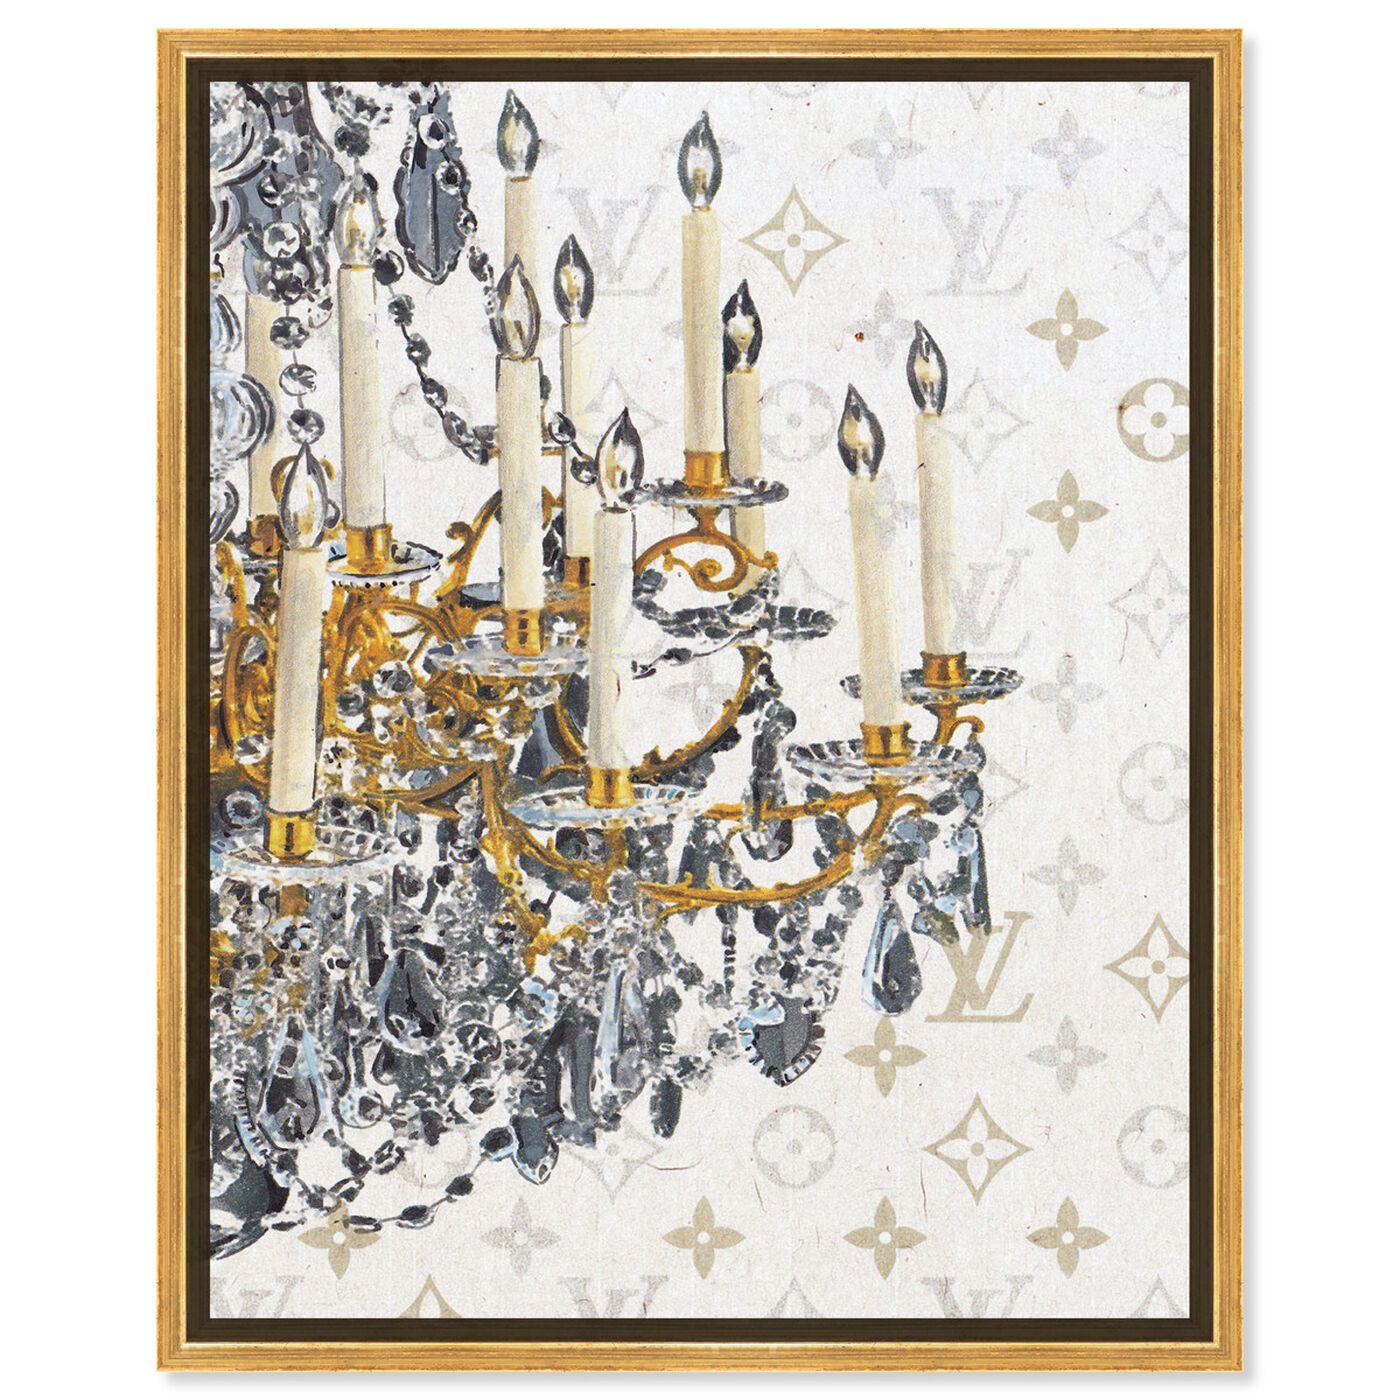 Front view of Fancy Light II featuring fashion and glam and chandeliers art.